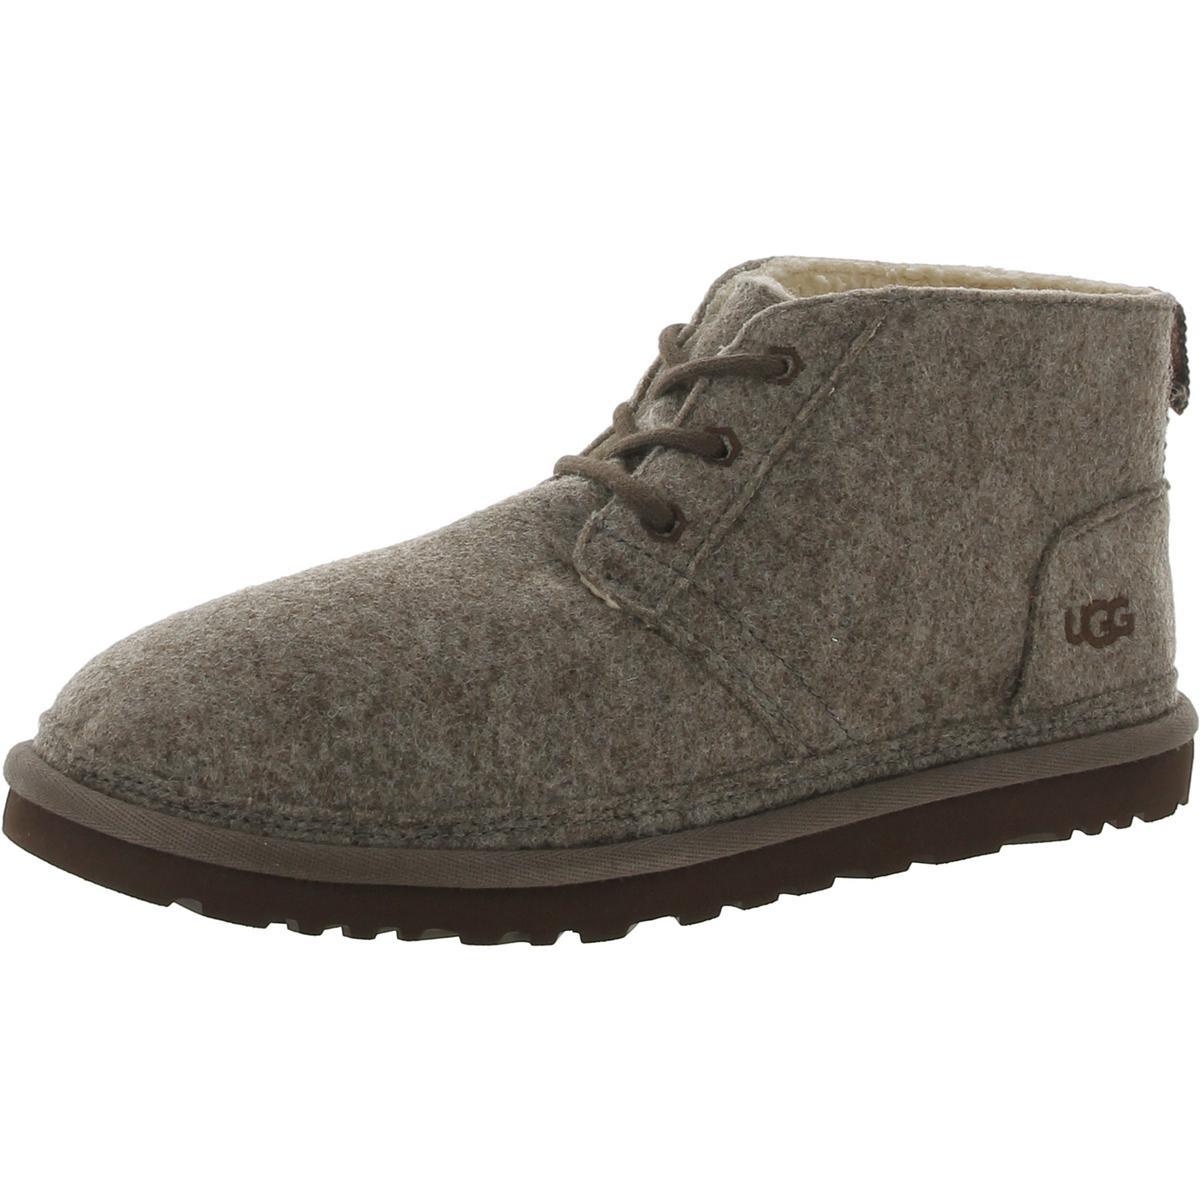 Ugg Womens Refelt Neumel Fur Lined Lace-up Ankle Boots Shoes Bhfo 2941 Chestnut